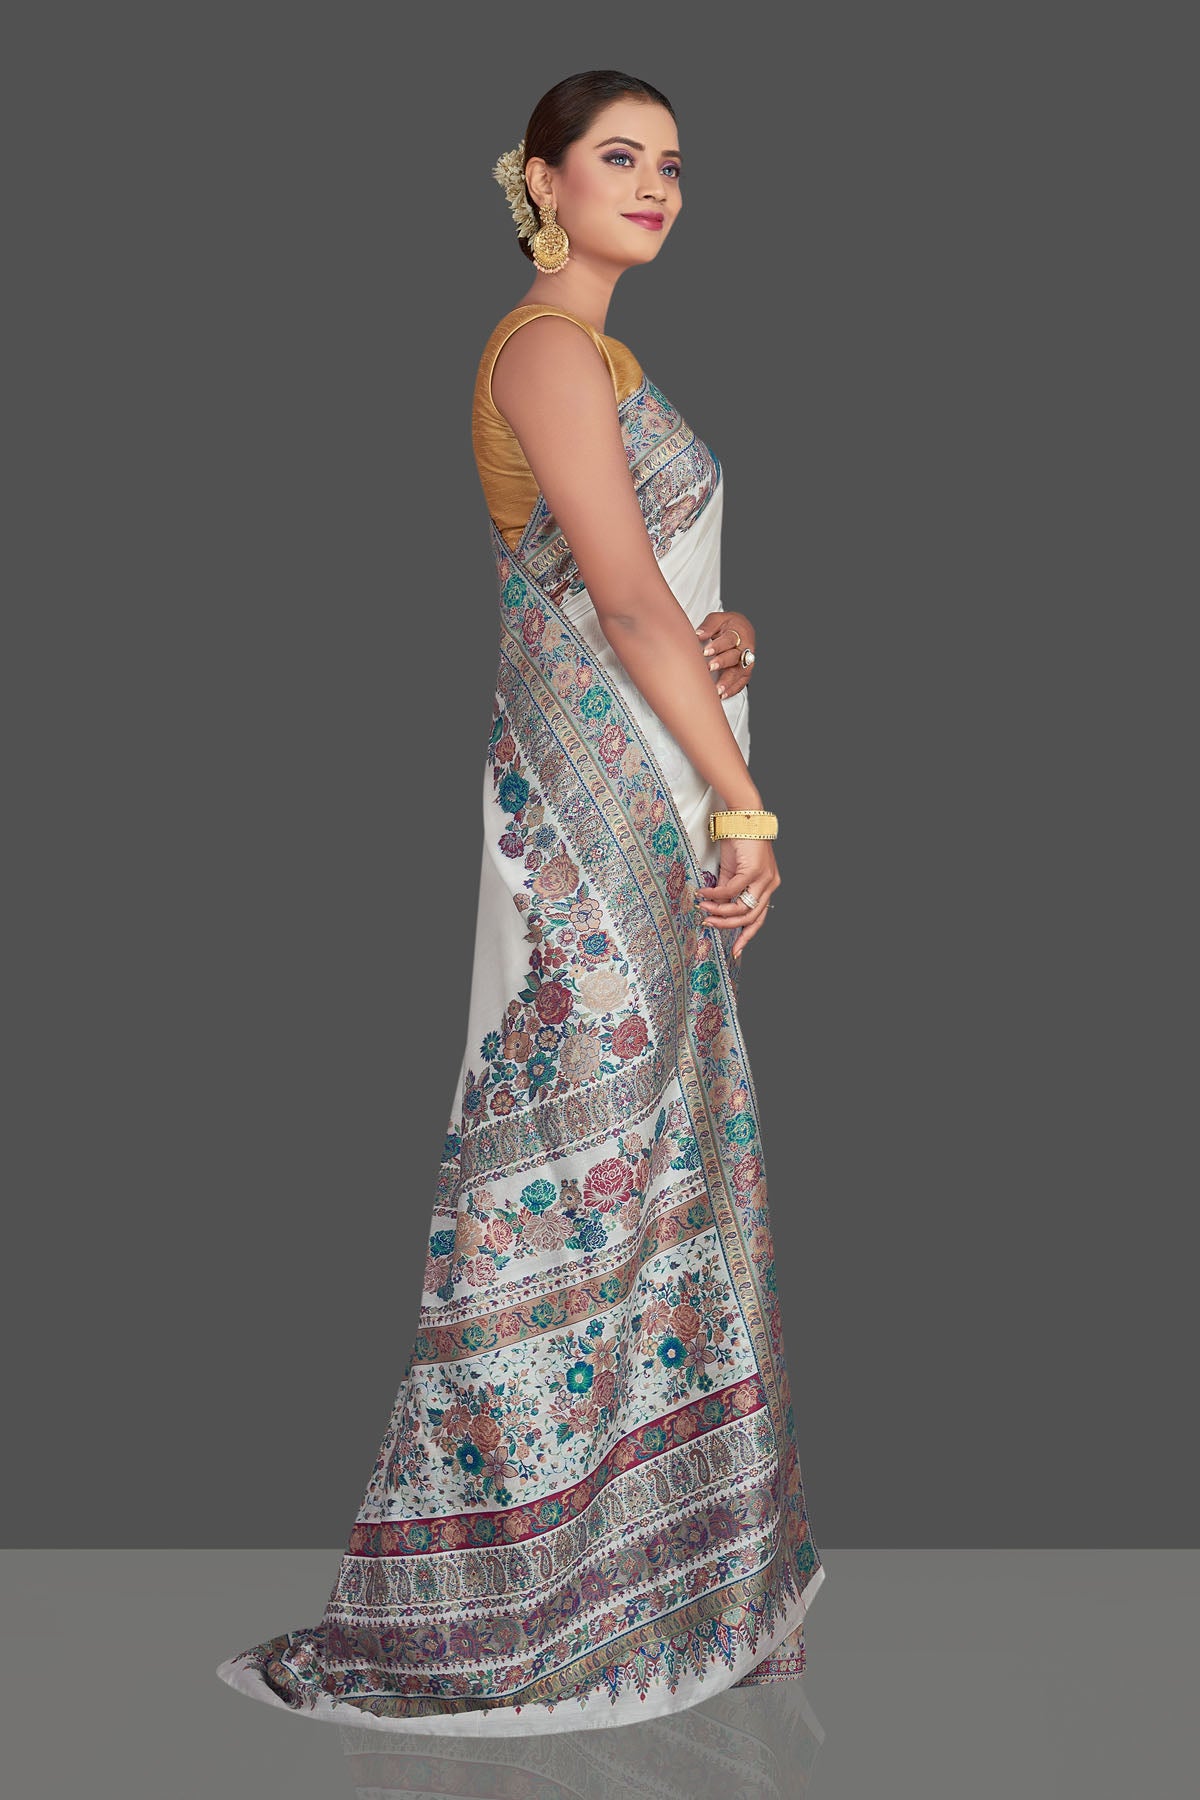 Buy stunning off-white Kani weave tussar muga silk sari online in USA. Make your presence felt on special occasions in beautiful embroidered sarees, handwoven saris, pure silk saris, tussar sarees from Pure Elegance Indian saree store in USA.-right